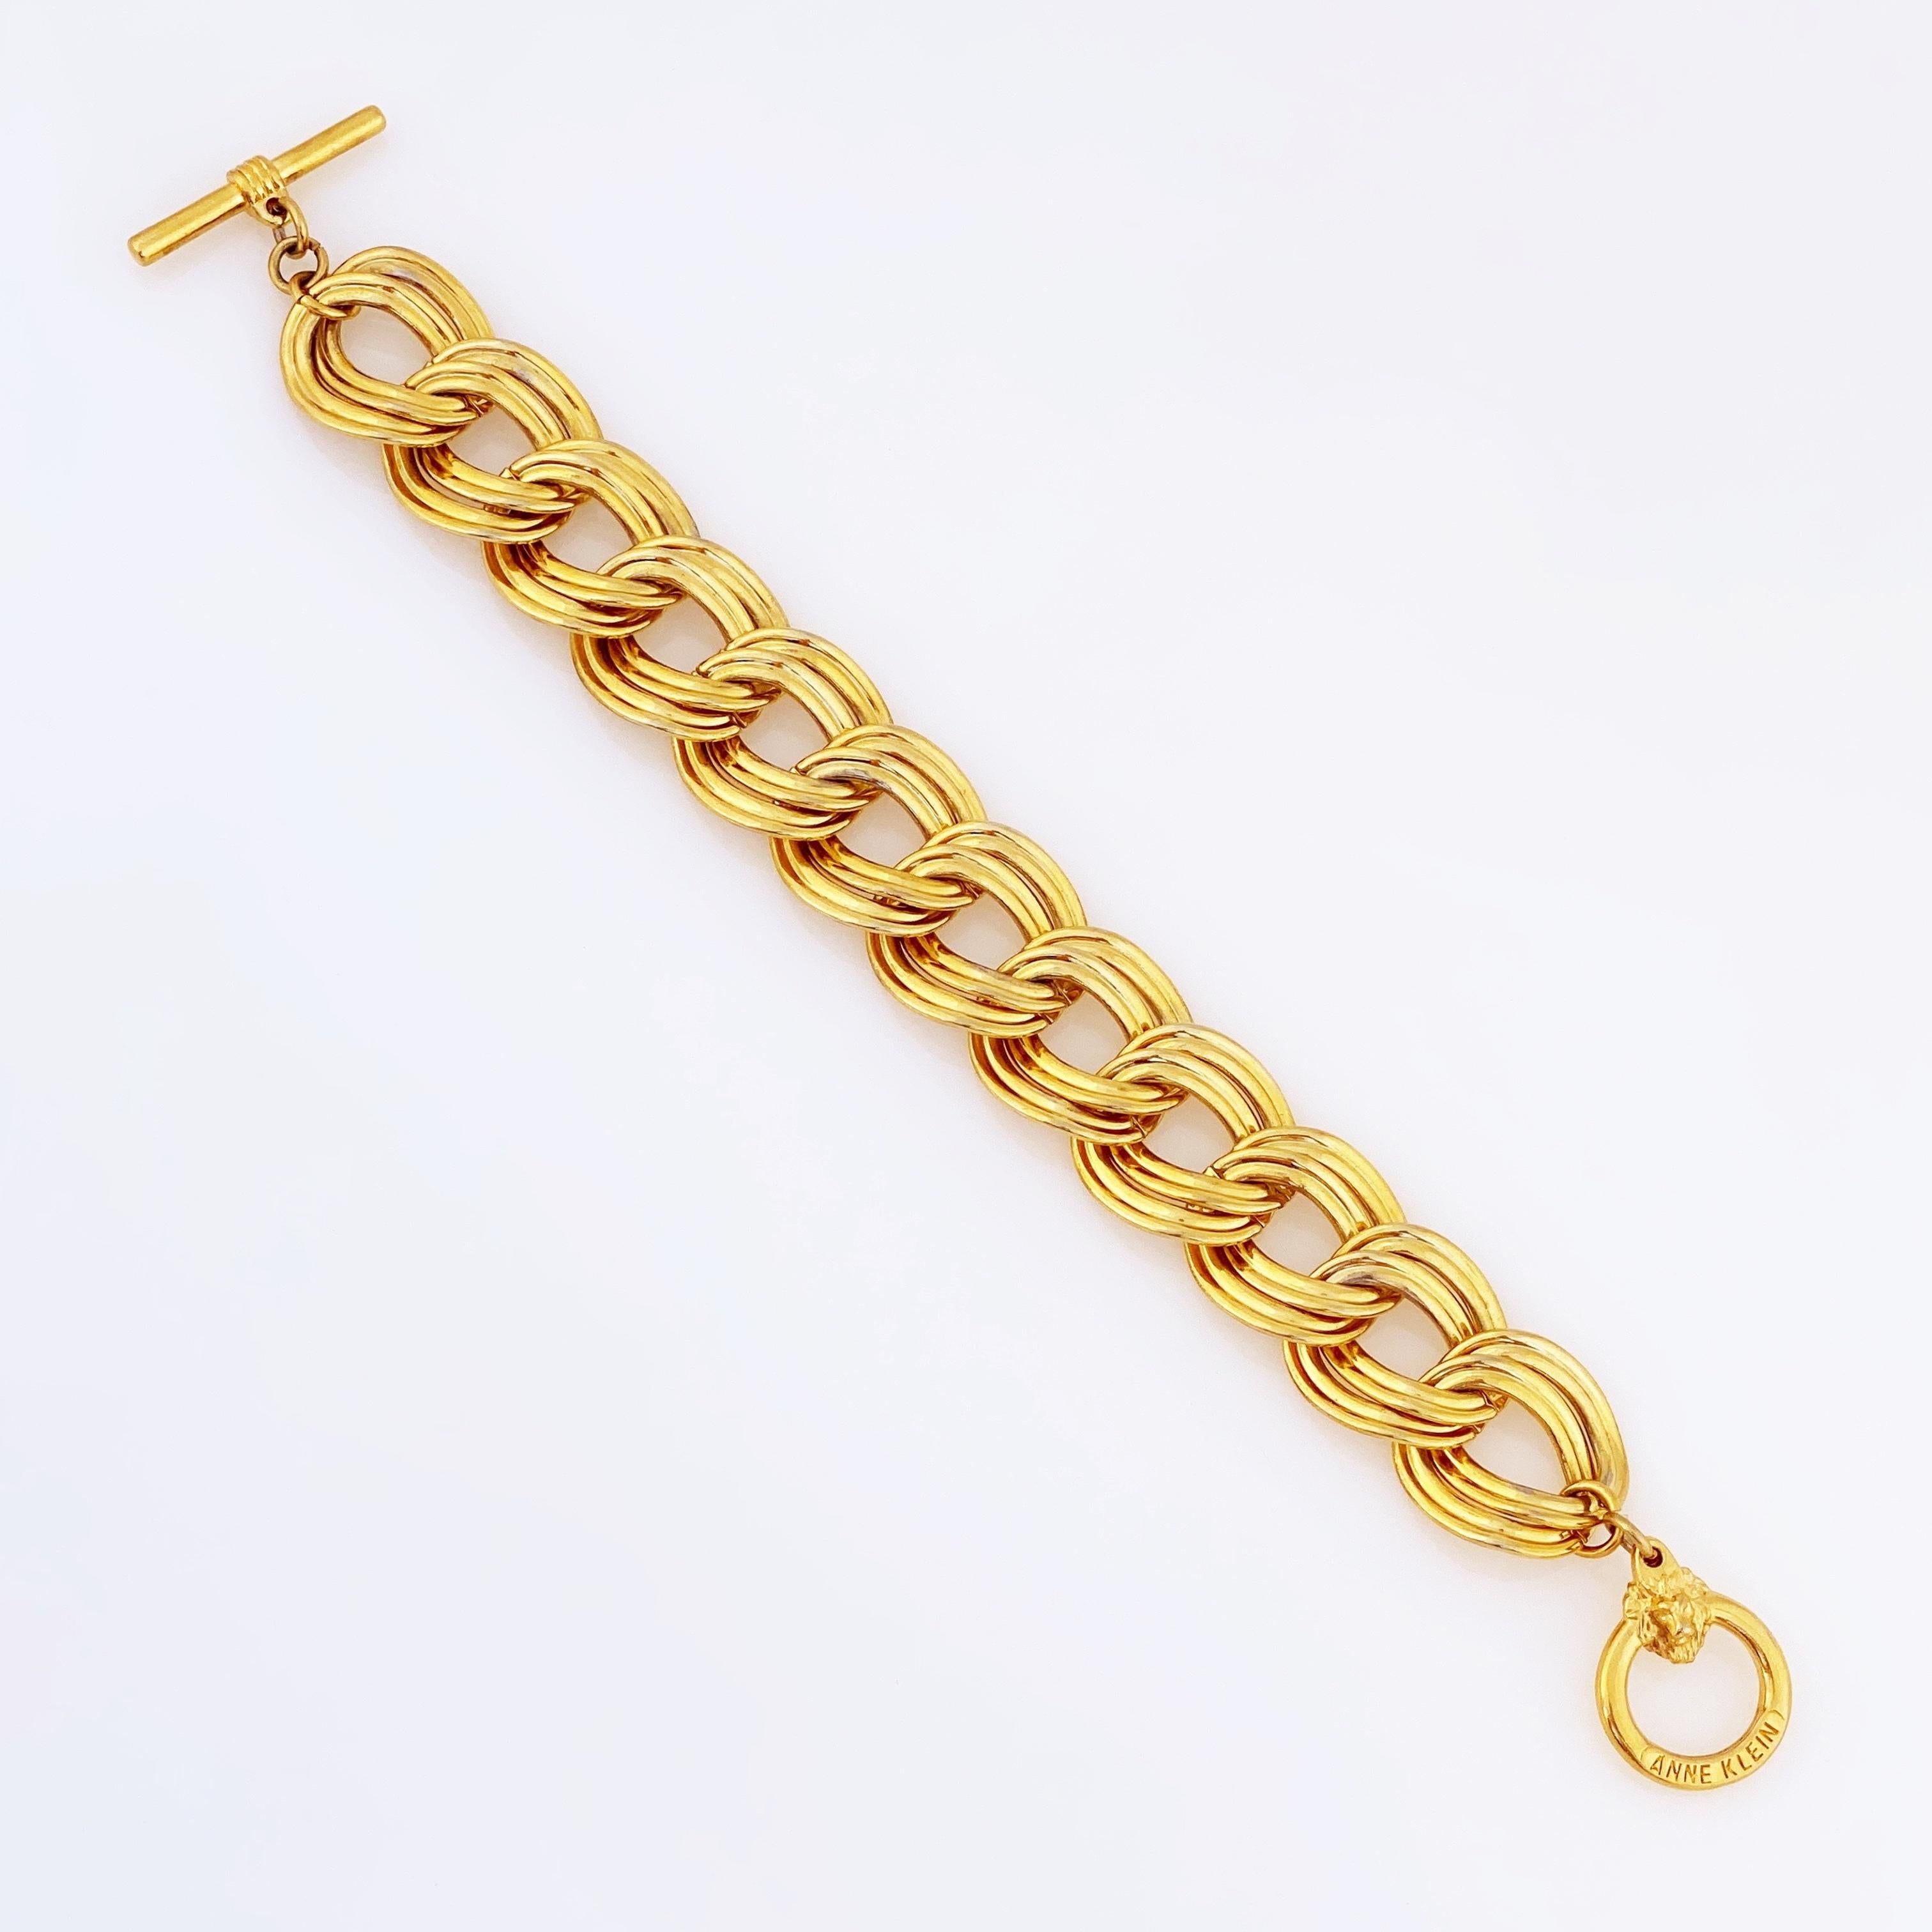 Women's Gold Oval Link Chain Bracelet With Lion Clasp By Anne Klein, 1980s